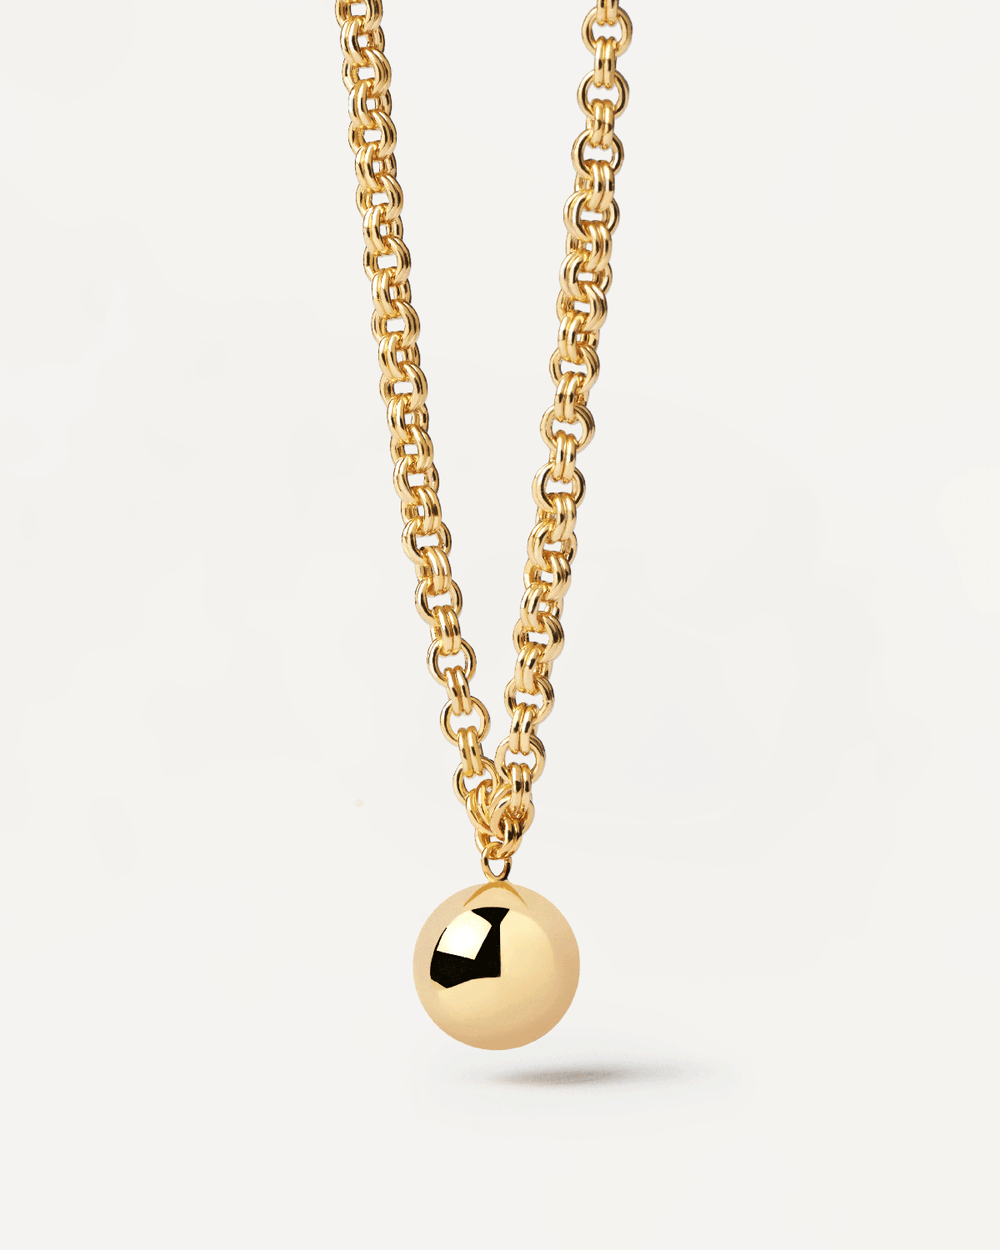 Gold-plated silver chain necklace with a hanging ball pendant 